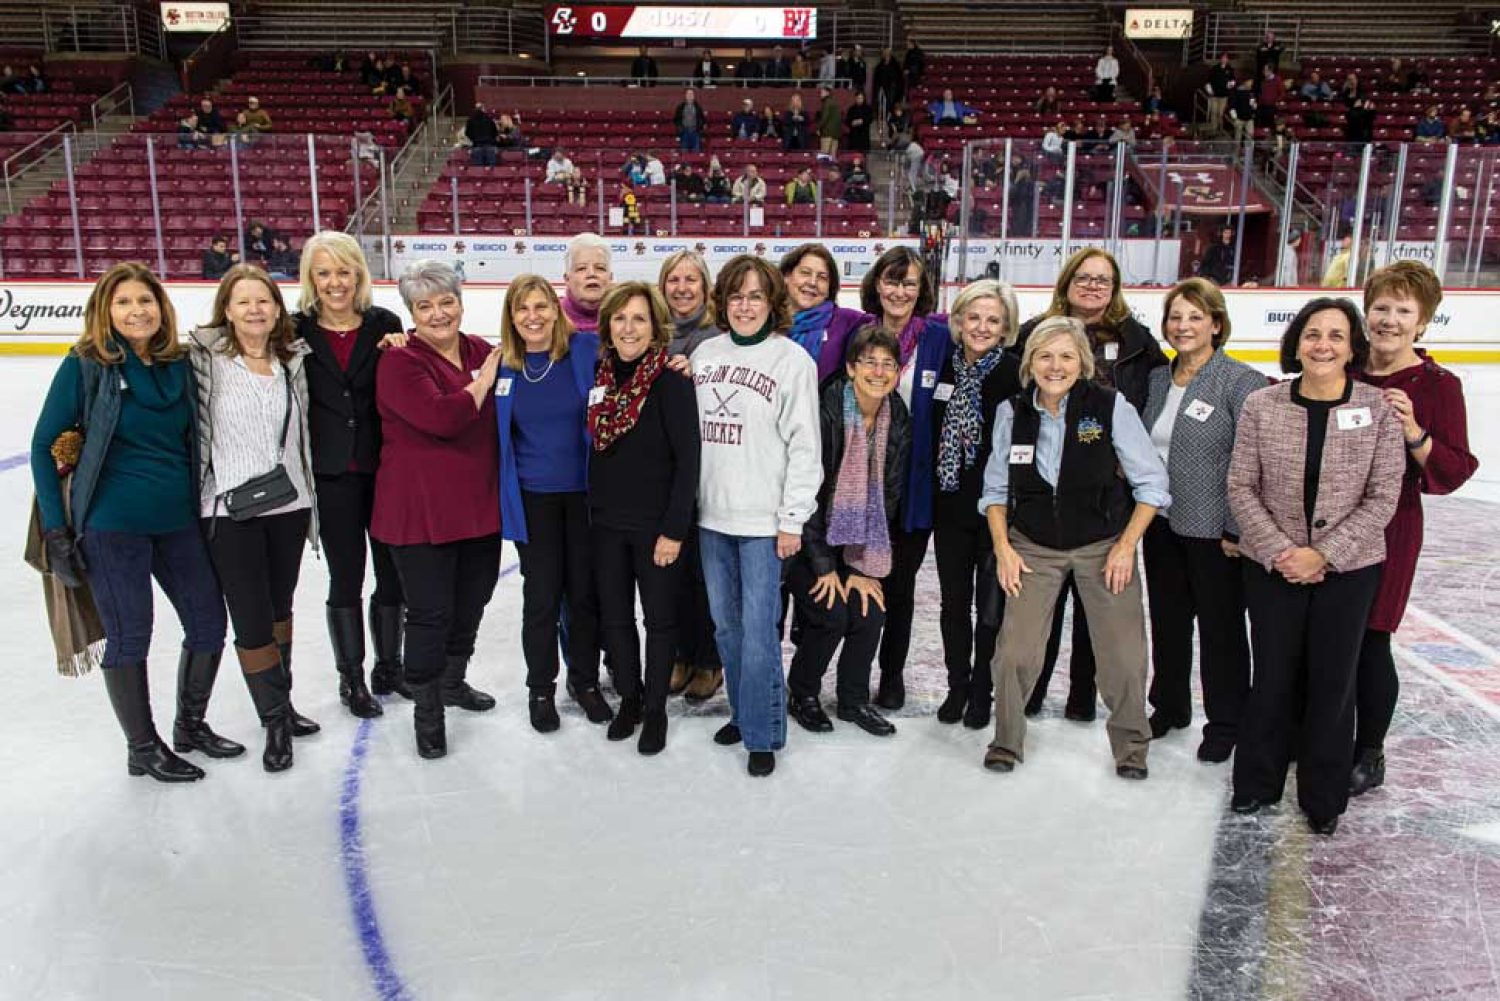 Group photo of former BC women's hockey players on center ice in Conte Forum